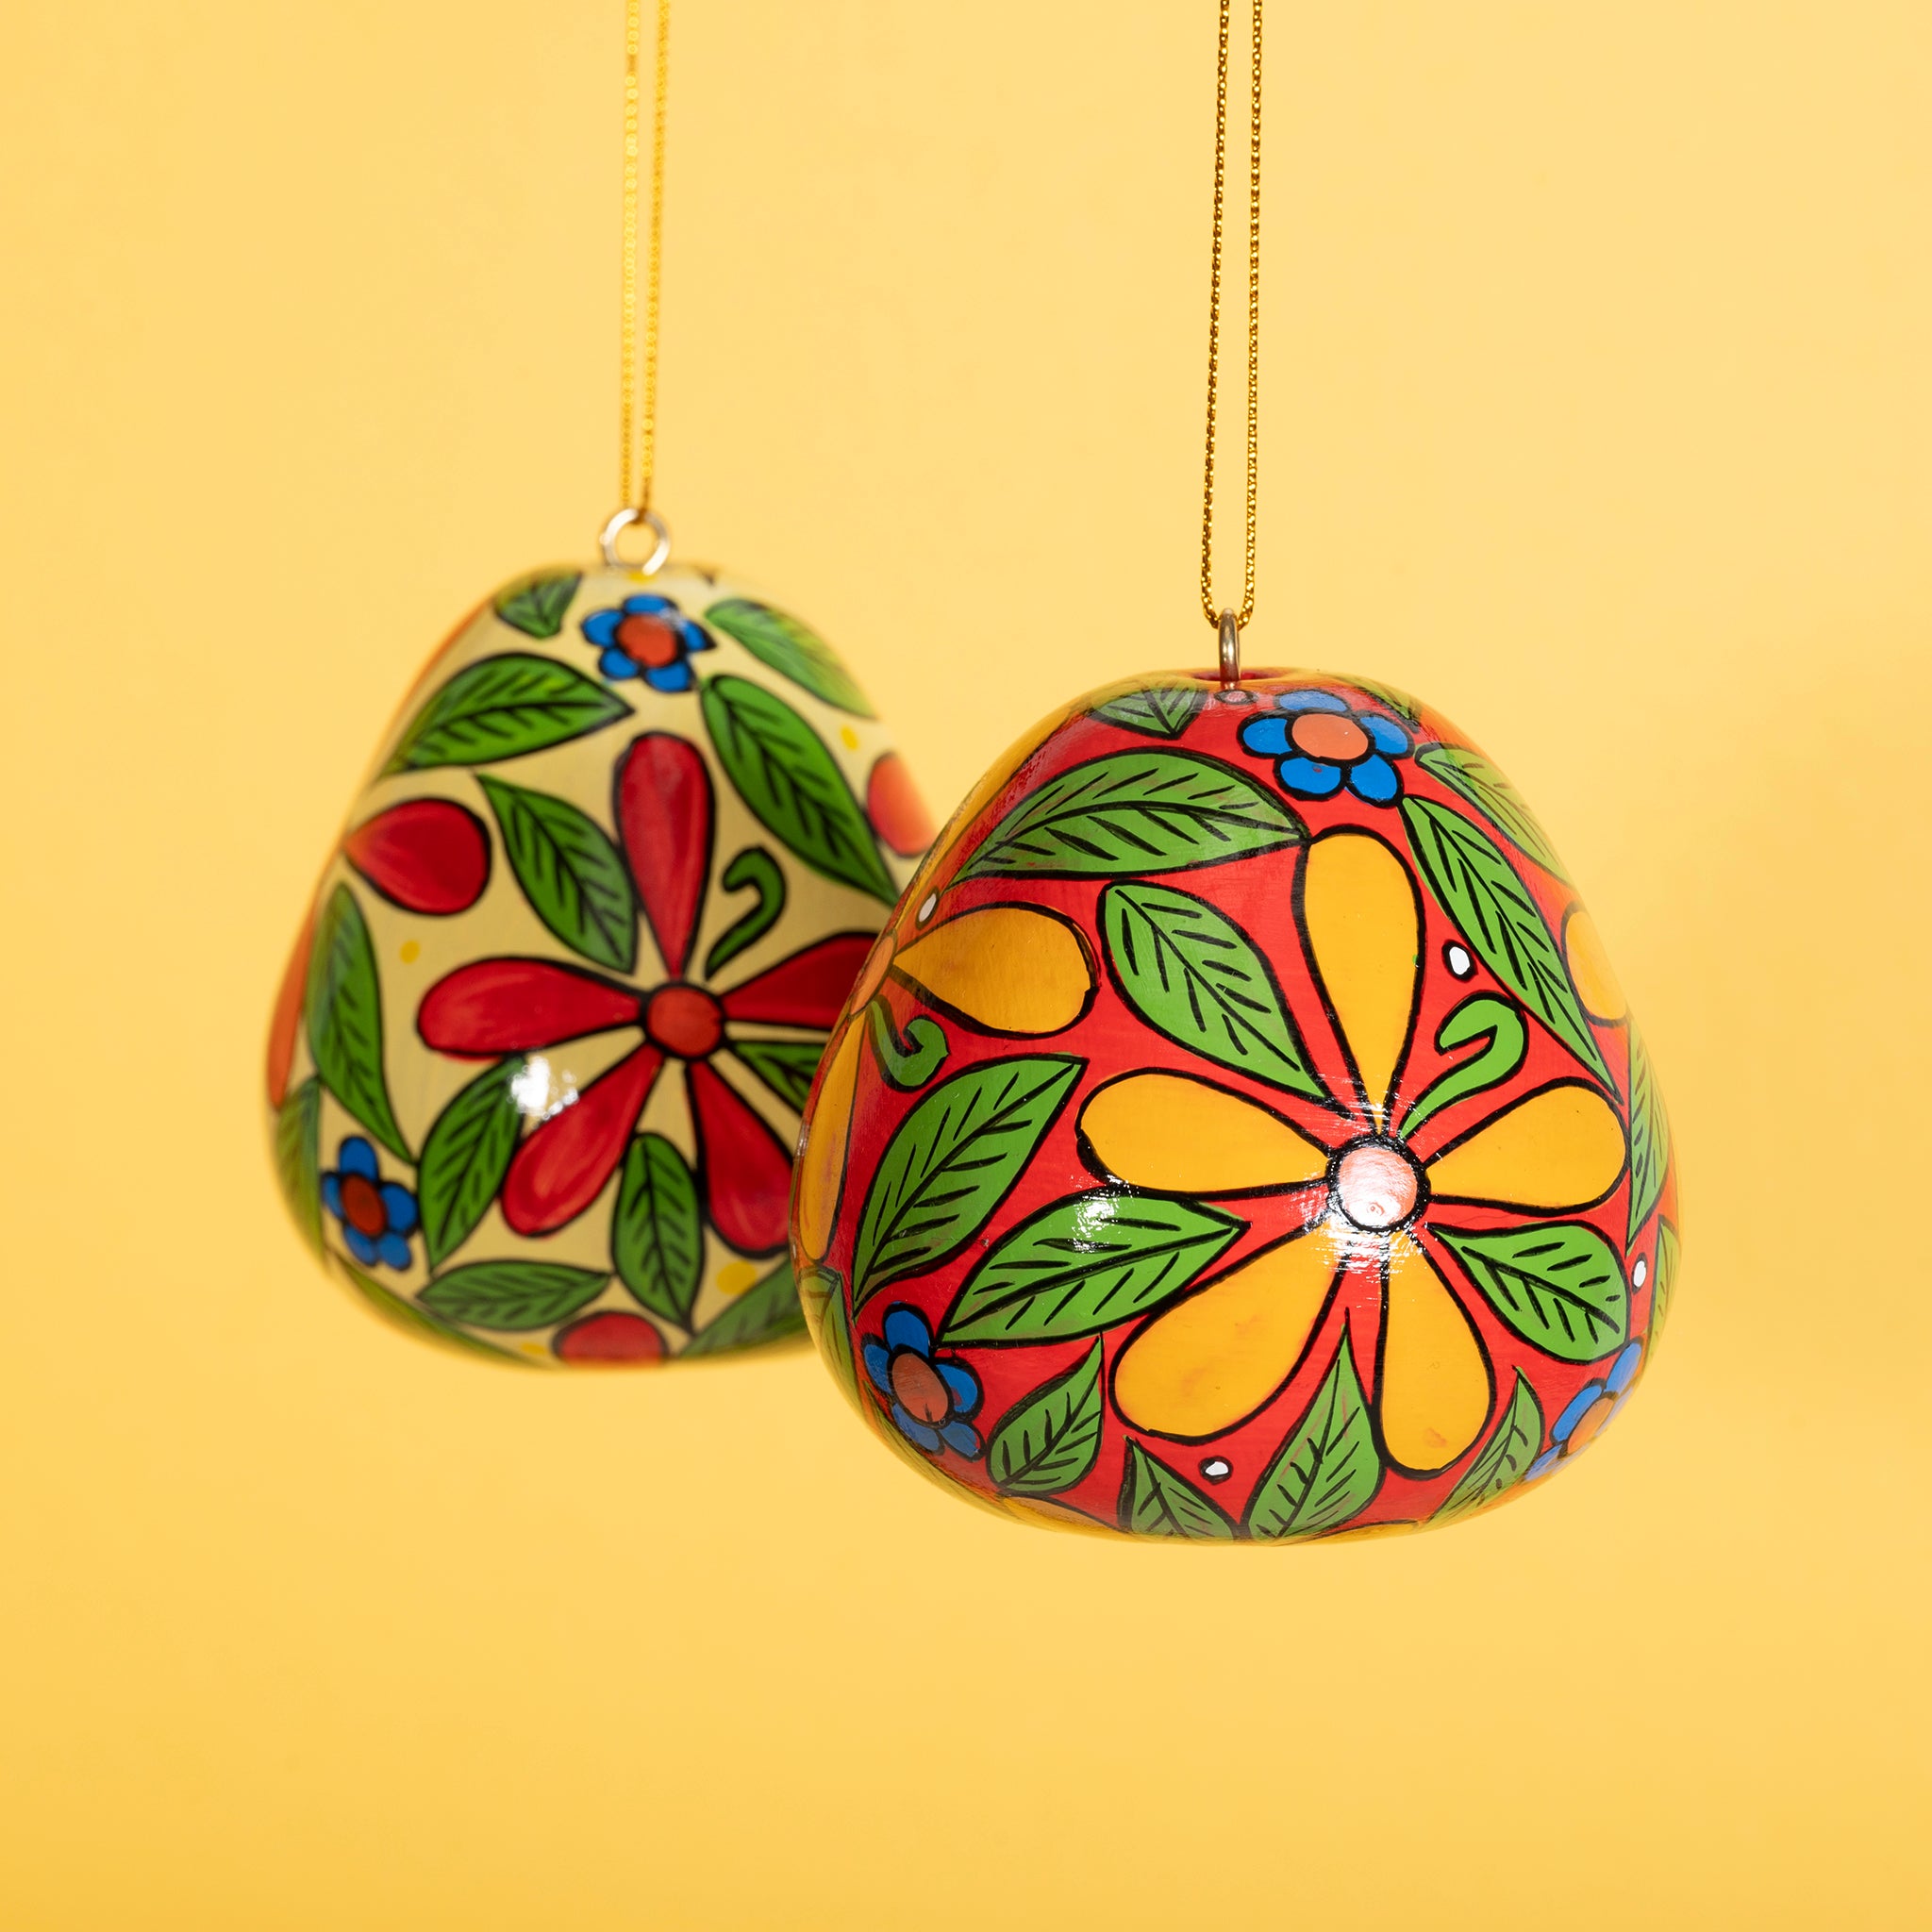 Flowers - Painted Gourd Ornament